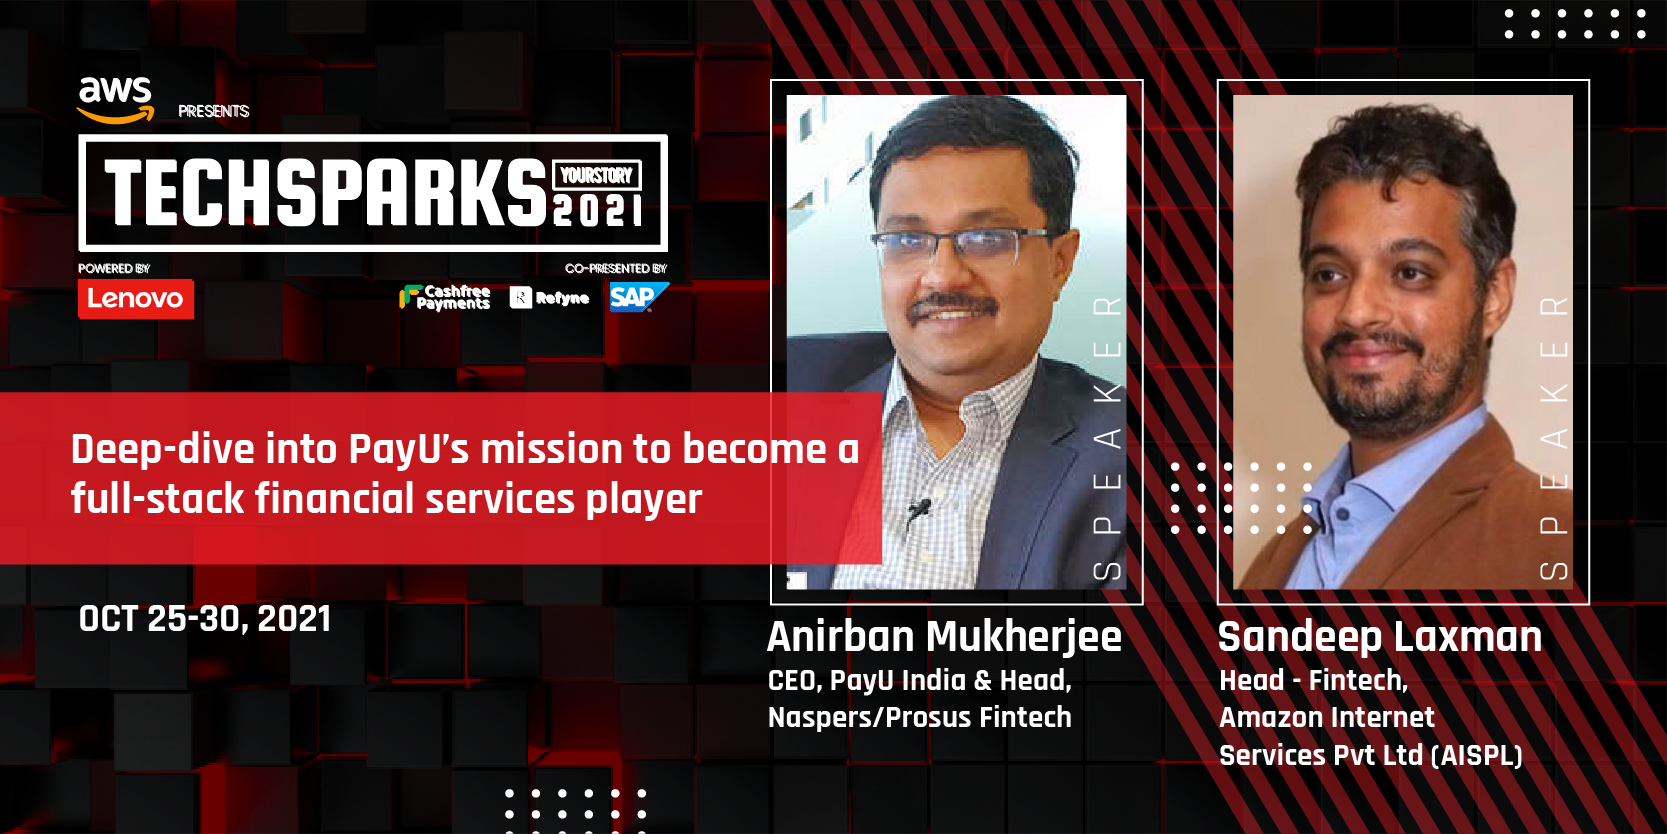 We want to build a full fintech ecosystem in India, says PayU’s Anirban Mukherjee at TechSparks 2021